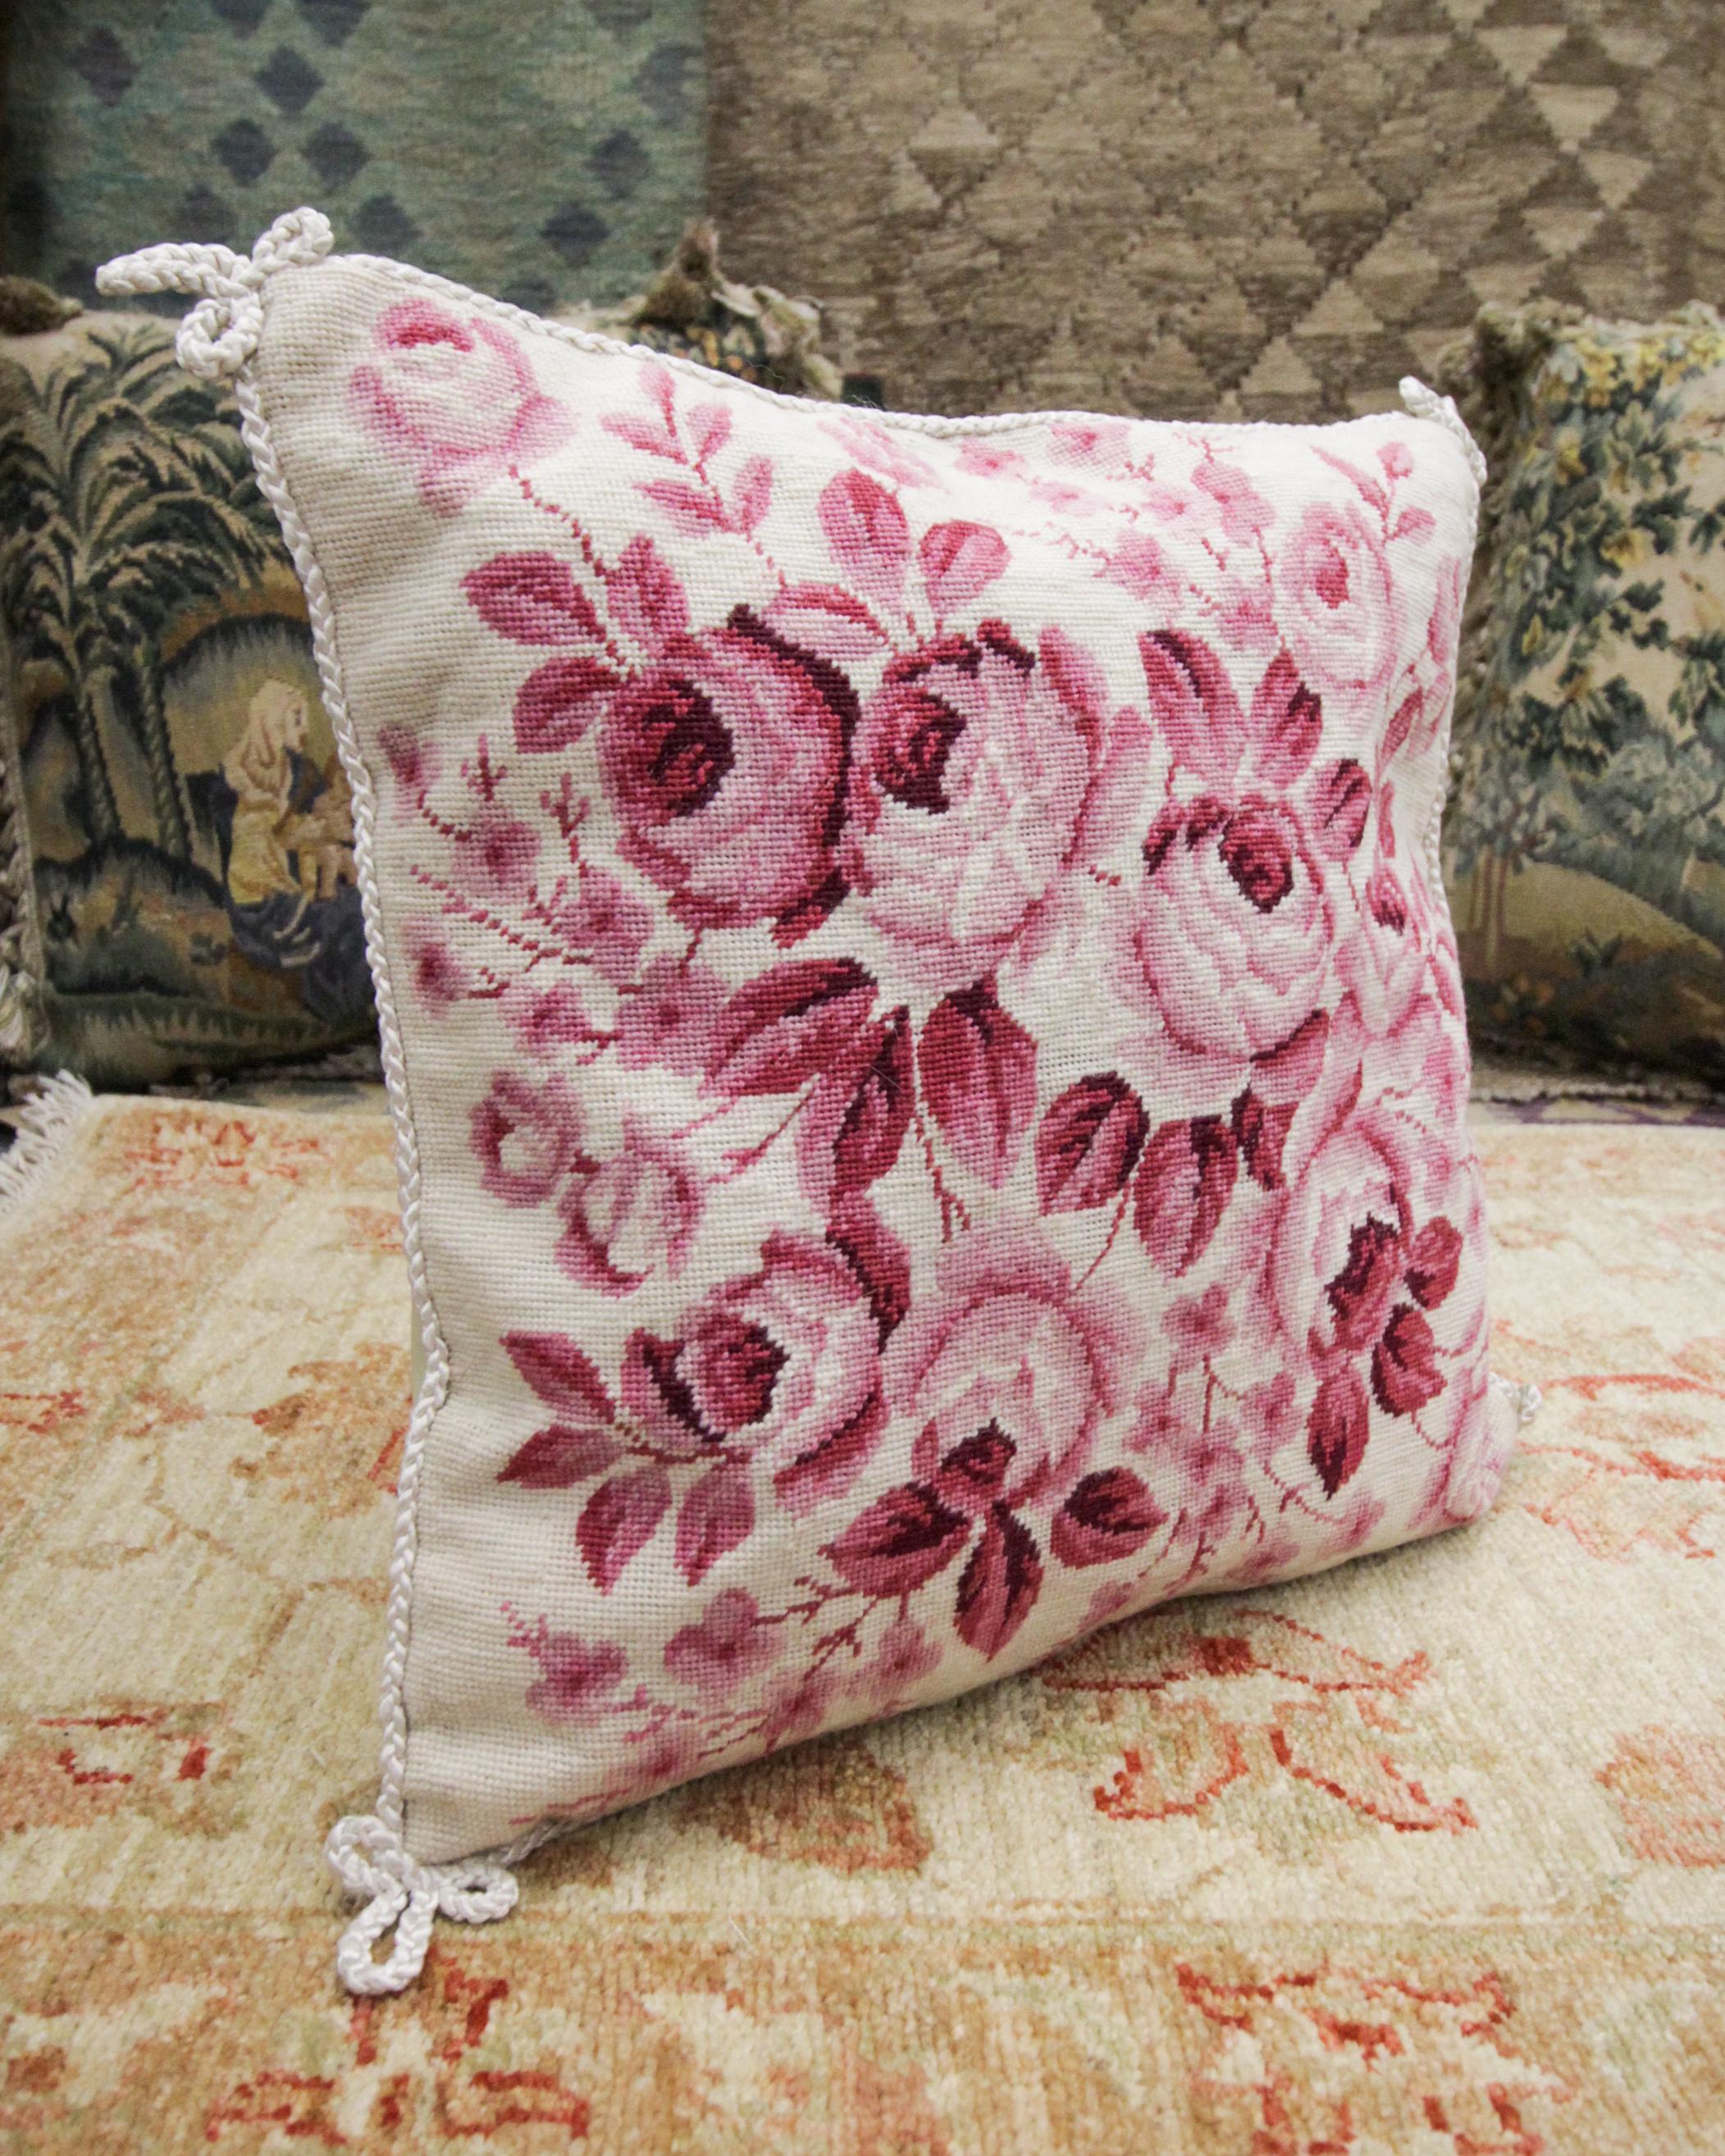 Hand-Woven Floral Cushion Cover Hand Embroidered Pillow Case Pink Wool Scatter Cushion For Sale